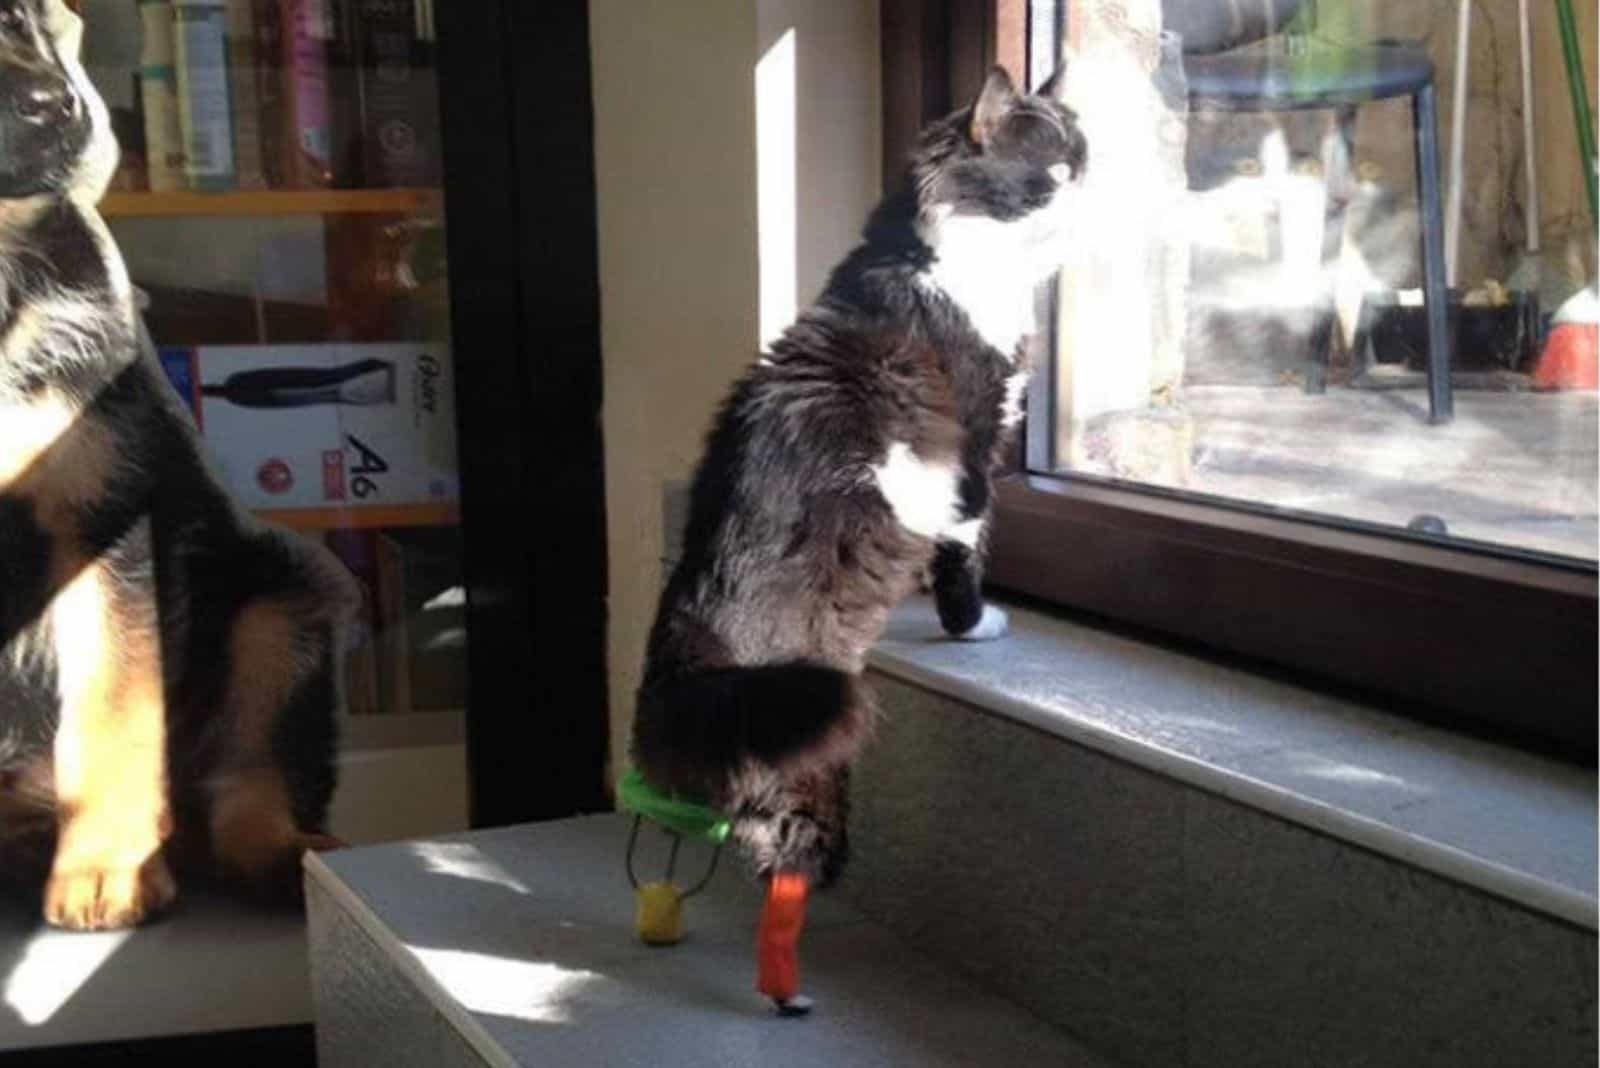 the rescued cat looks out the window